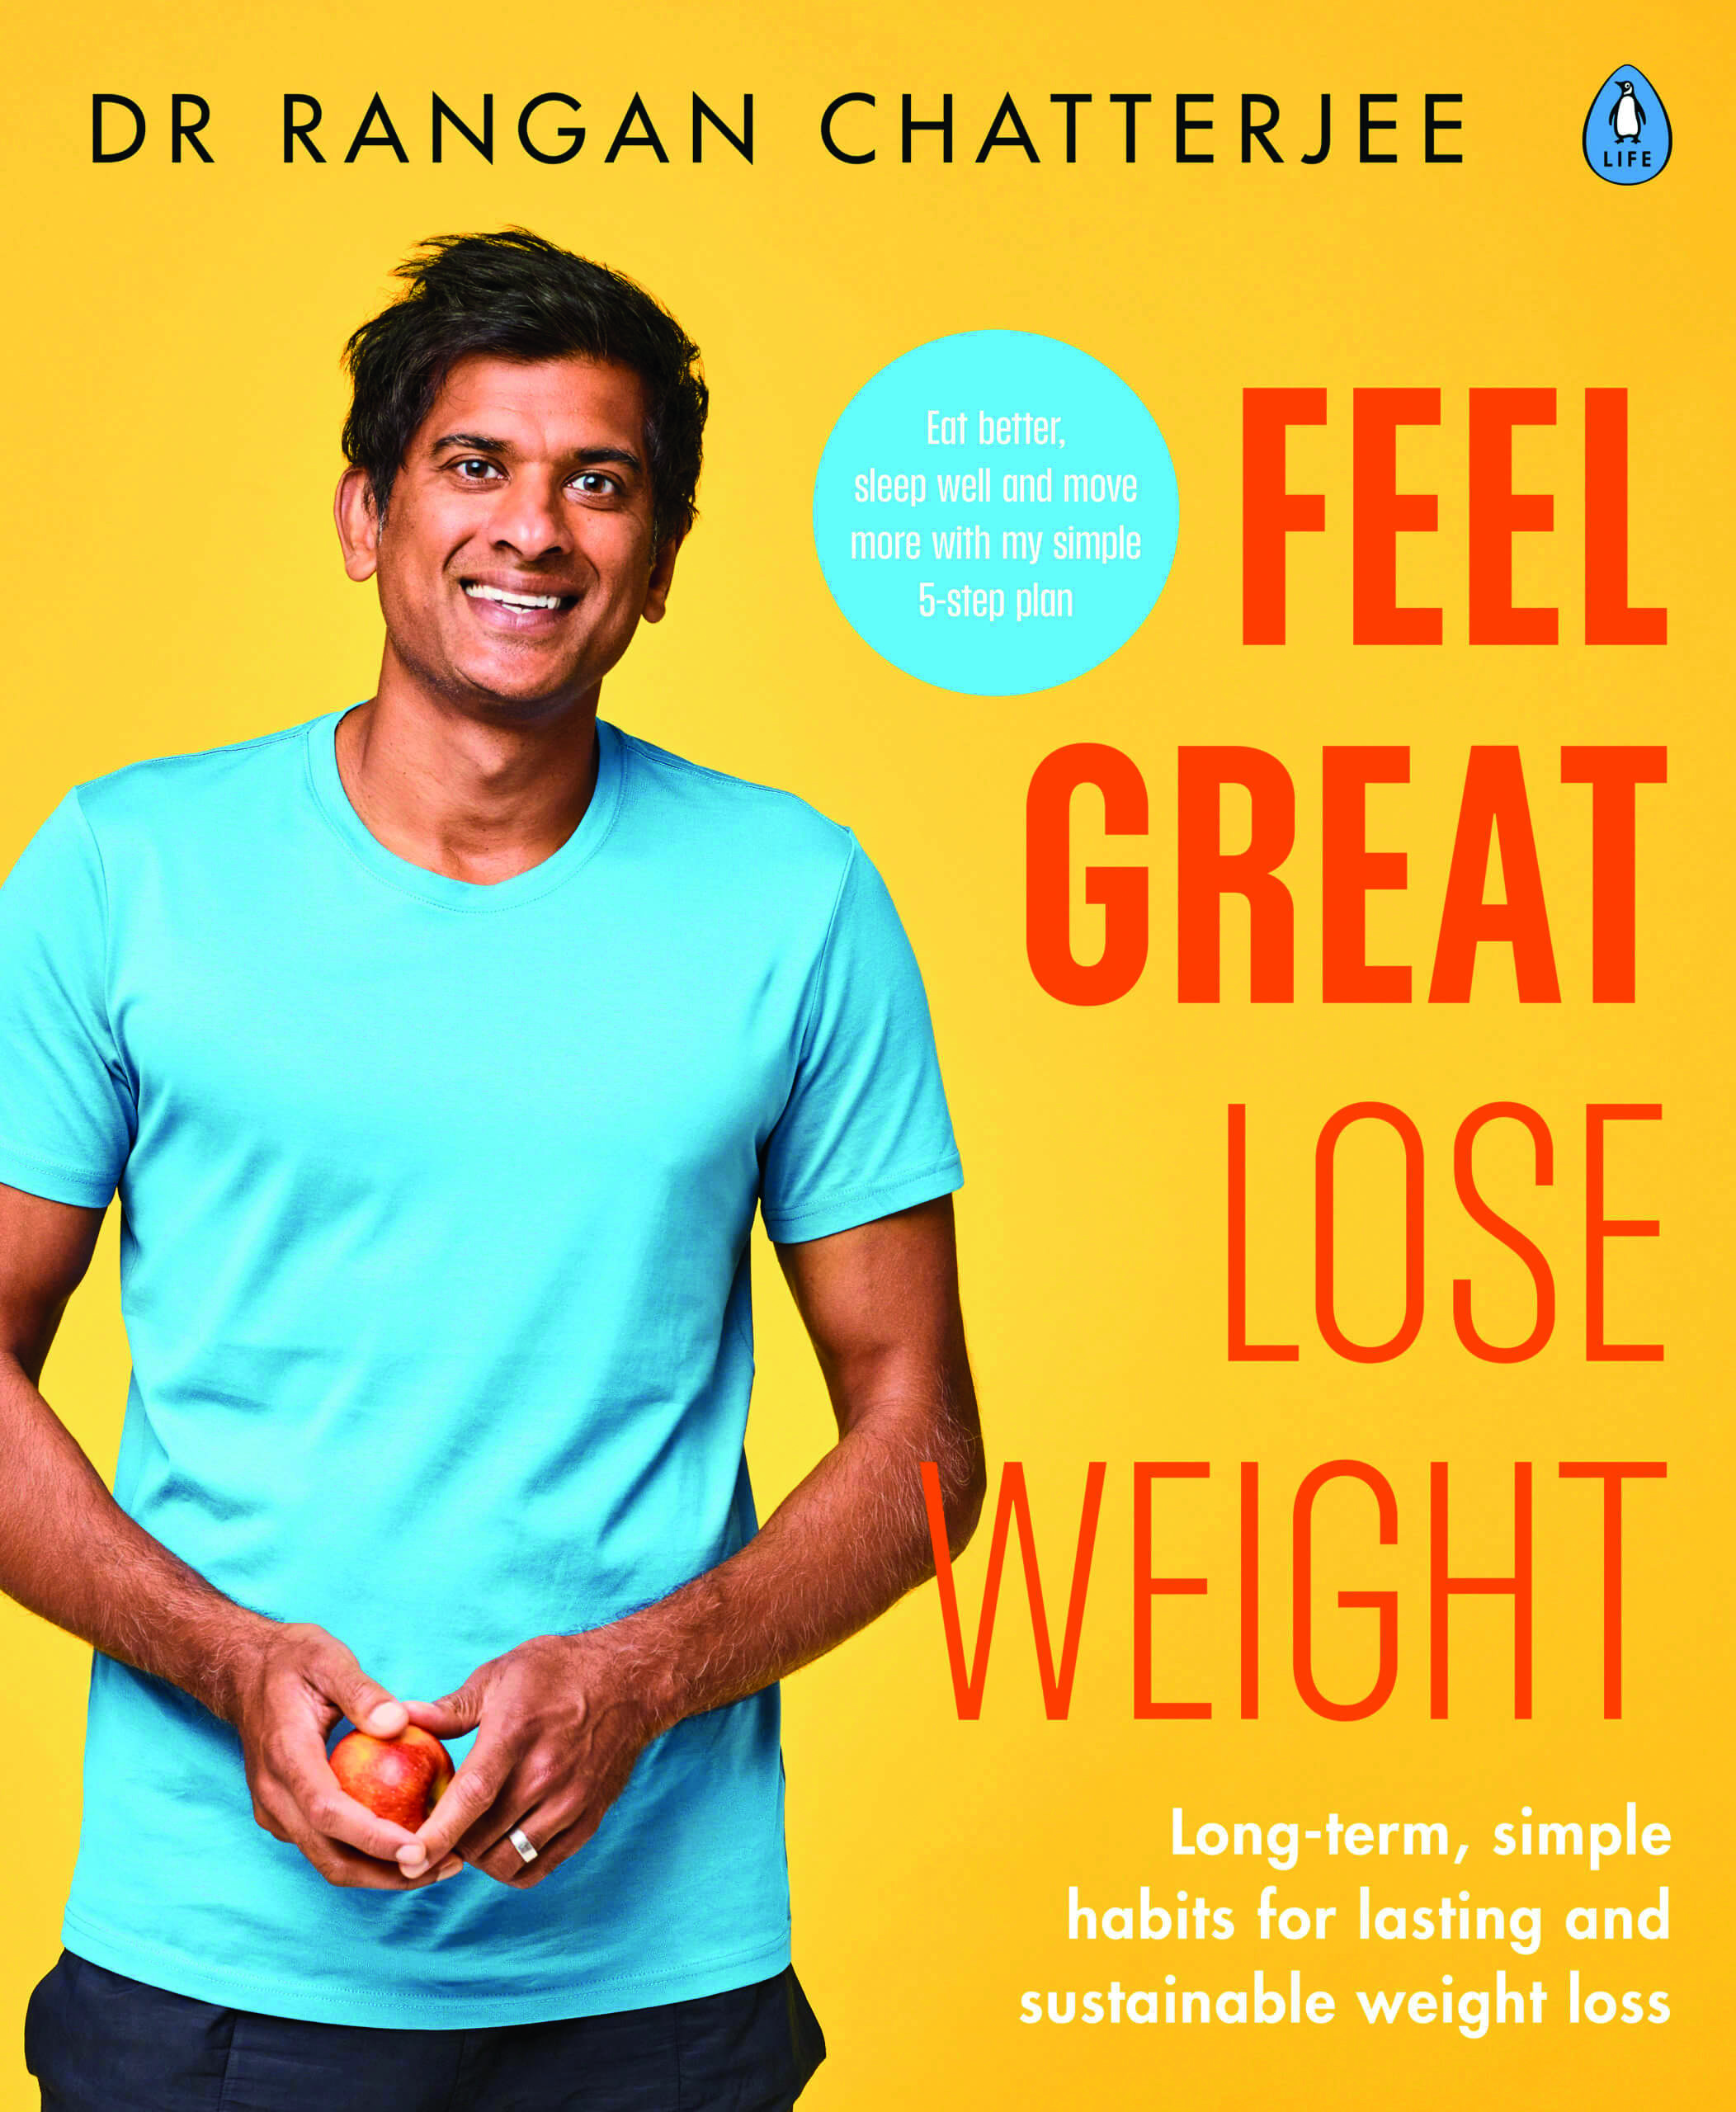 Feel great lose weight by Dr Rangan Chatterjee